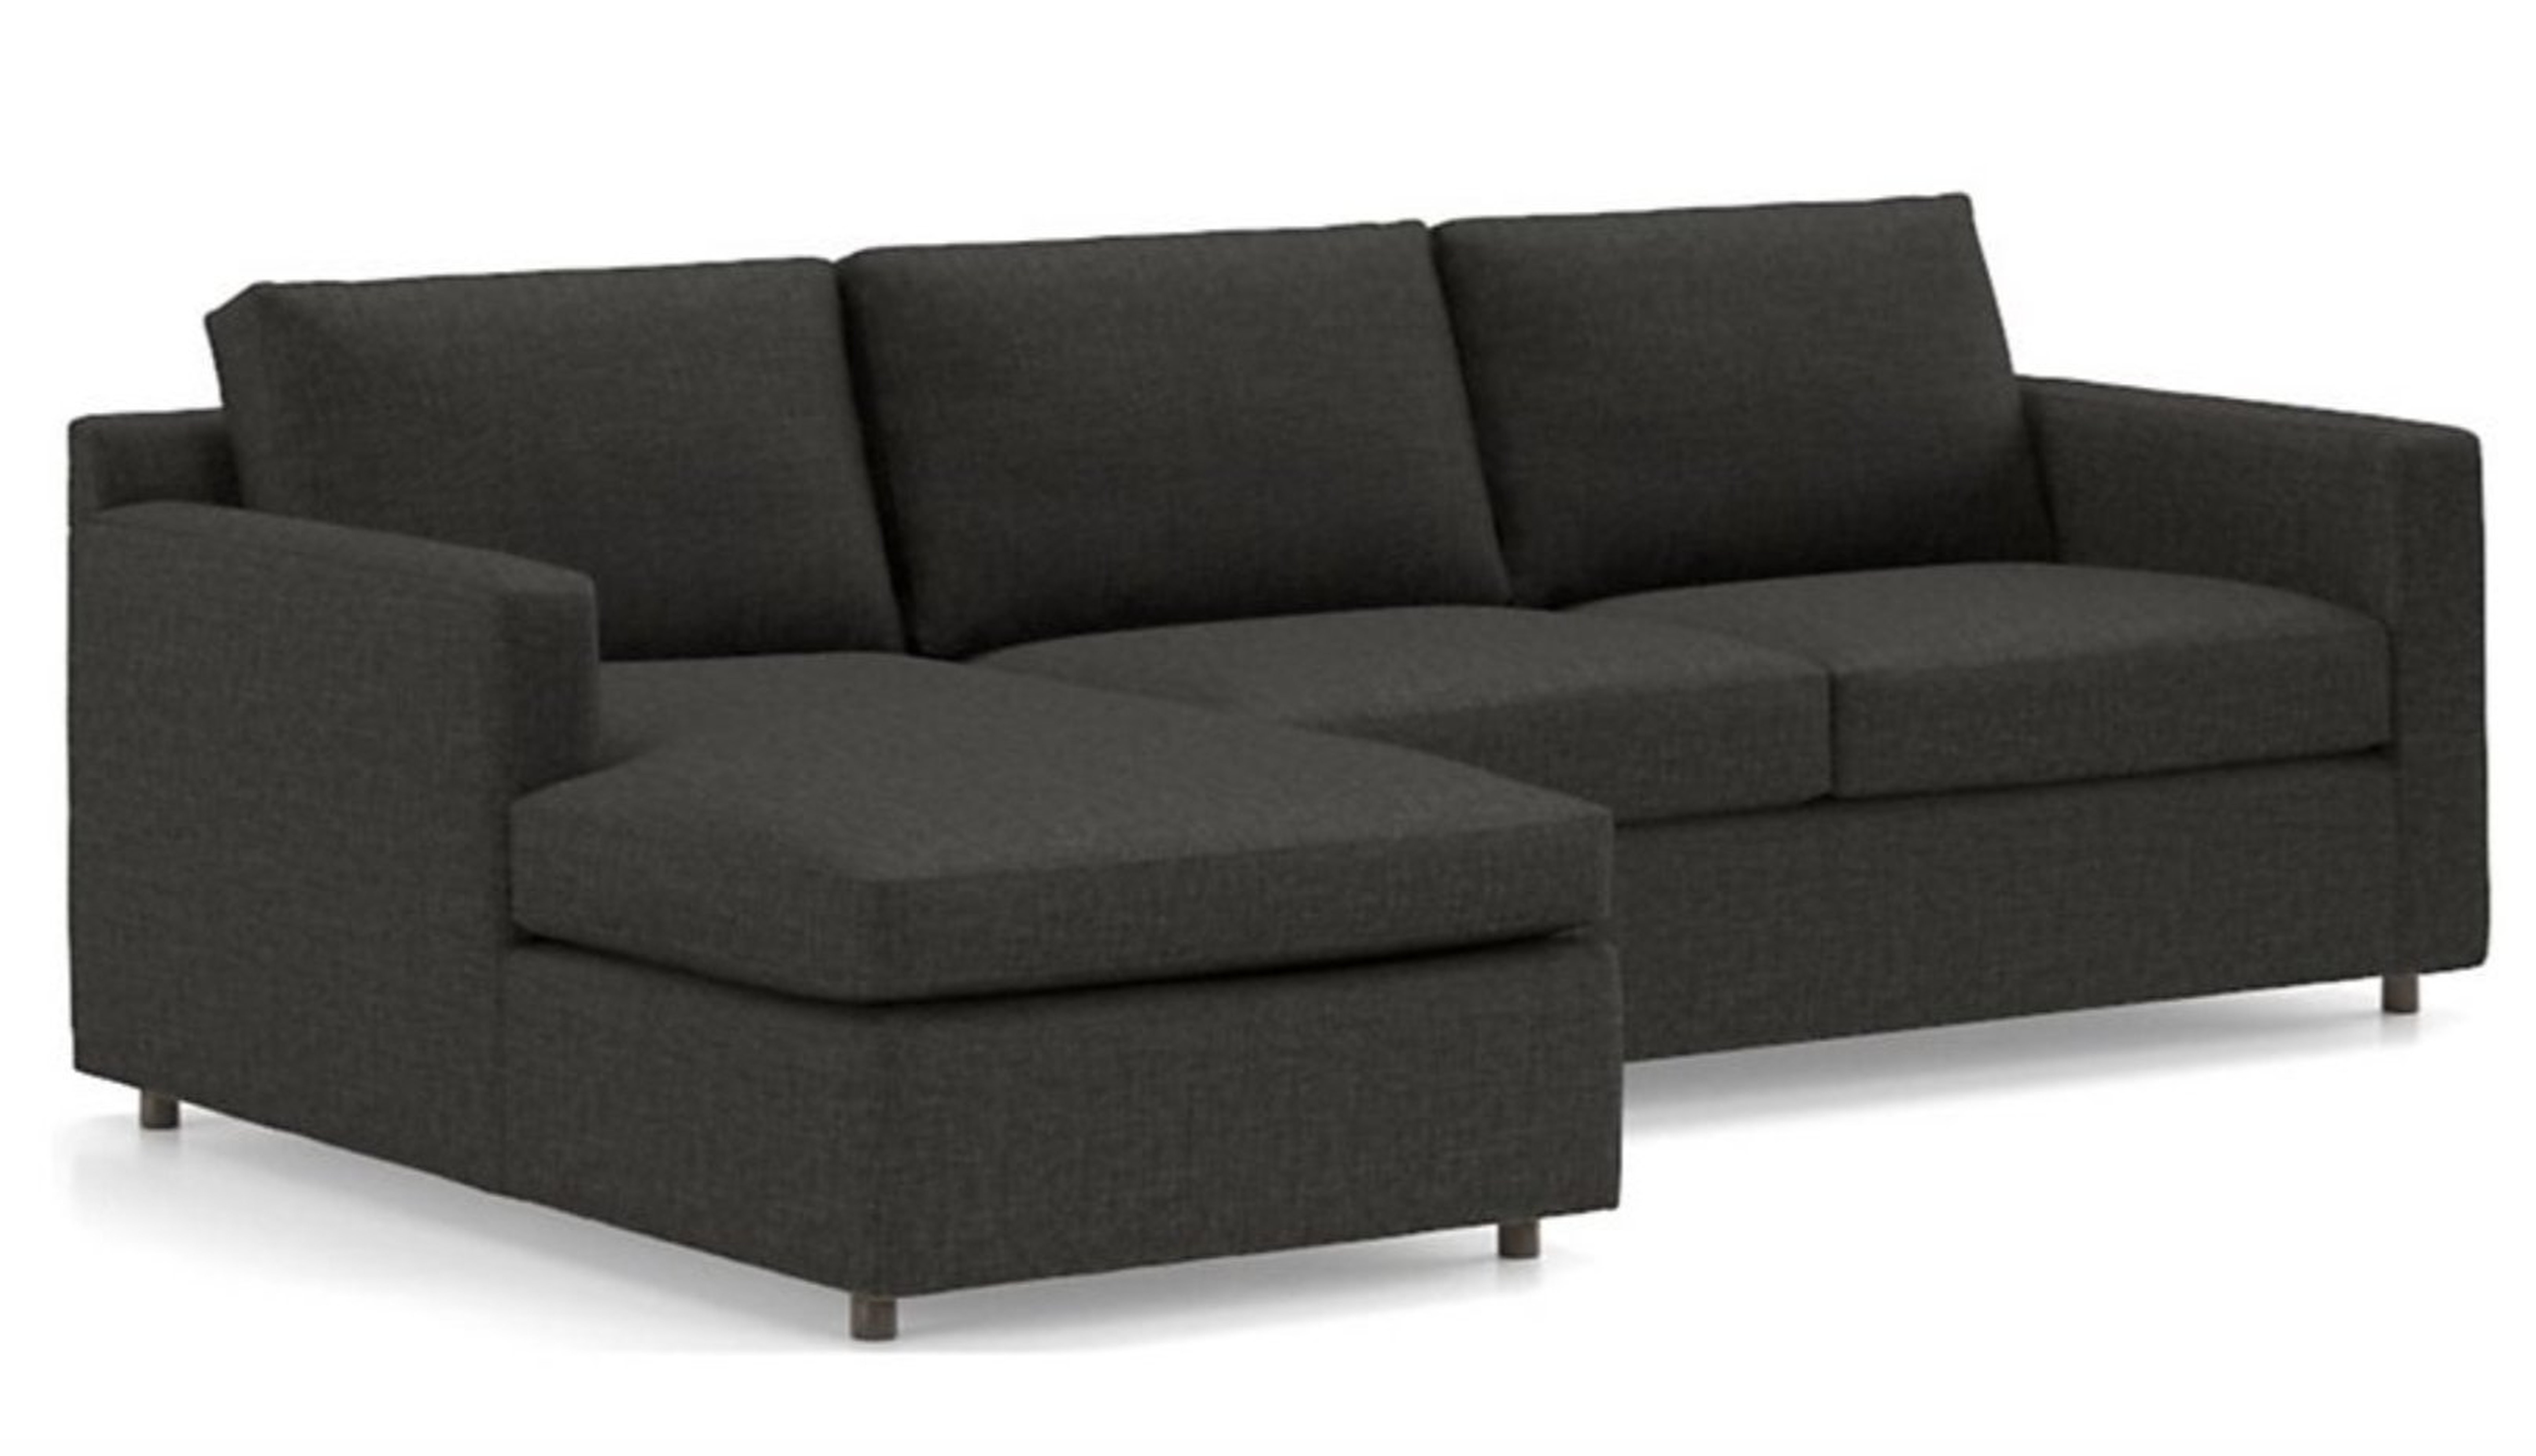 Barrett 2-Piece Left Arm Chaise Sectional, Galaxy Smoke - Crate and Barrel